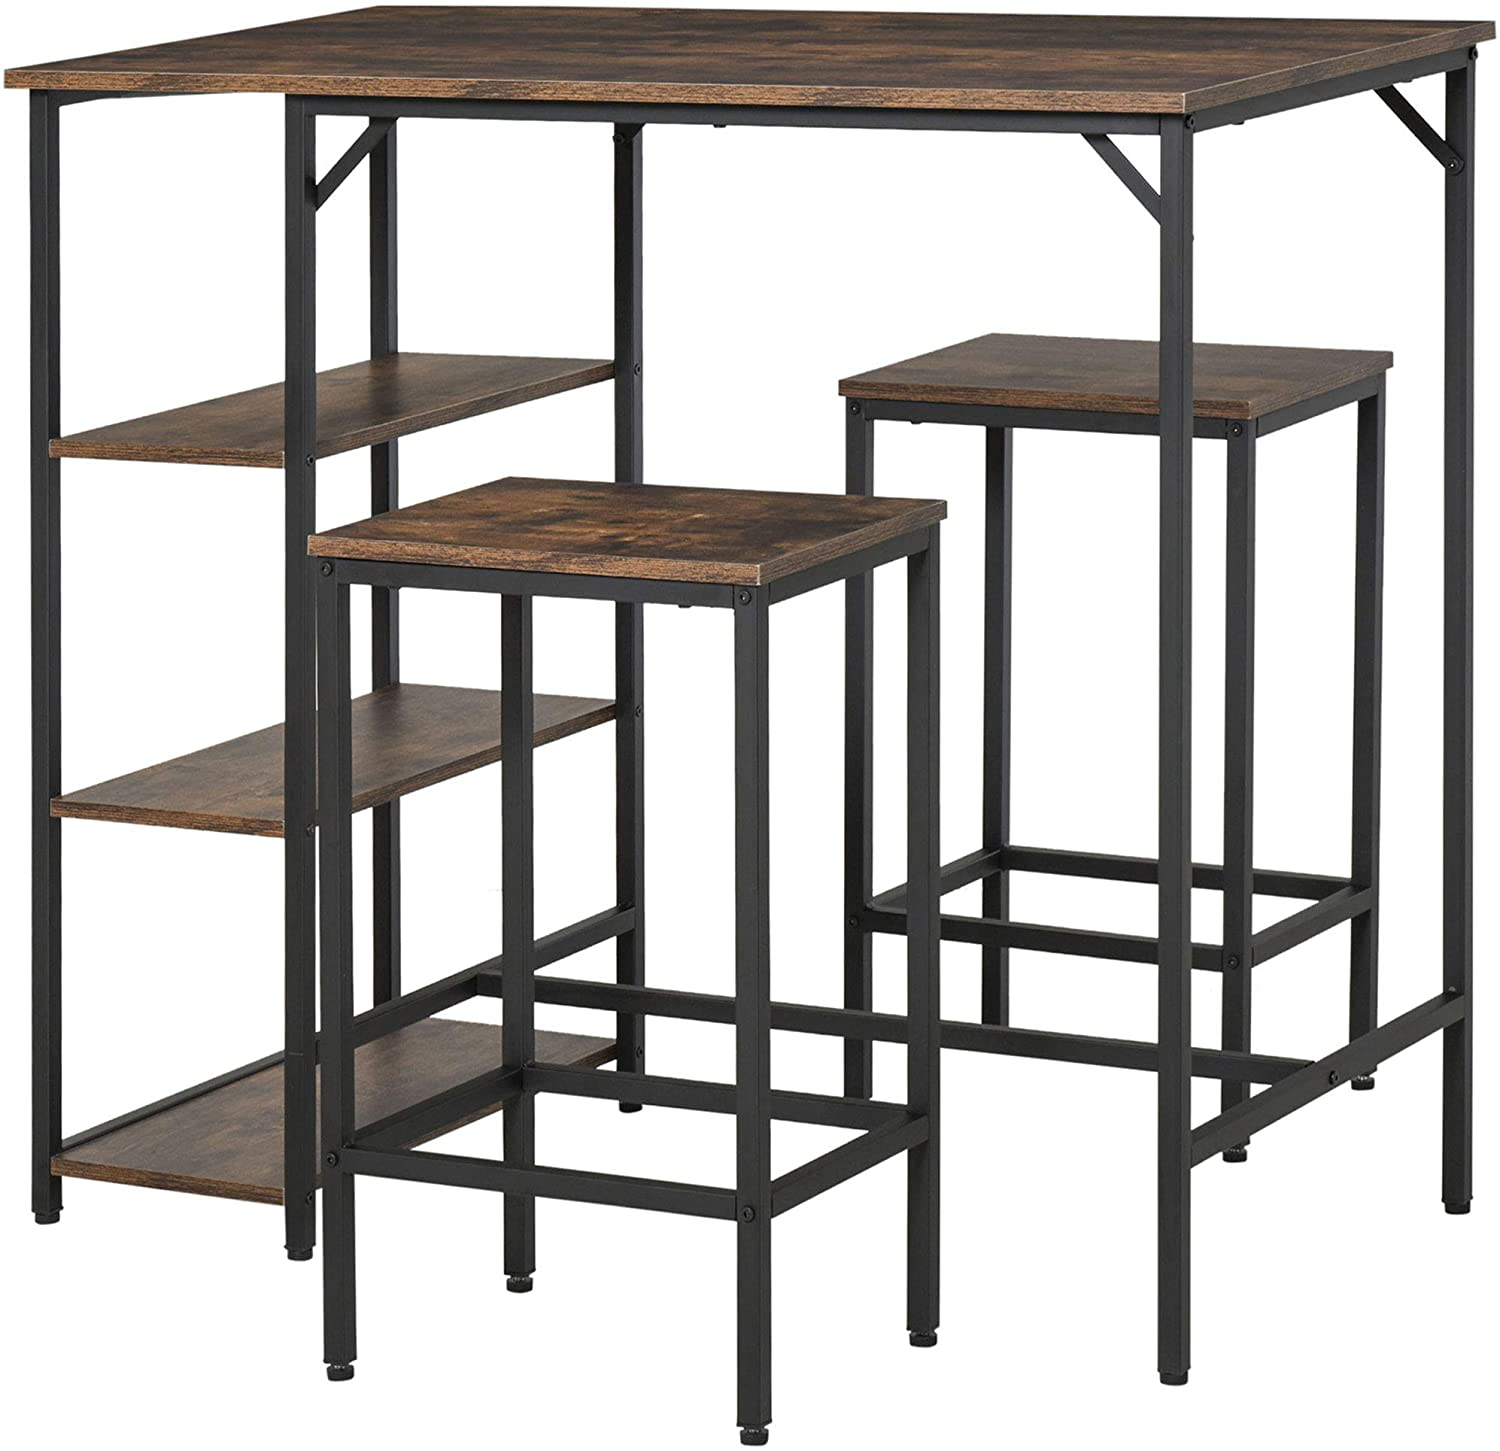 Rena Industrial Bar Height Dining Table Set with 2 Stools & Side Shelf